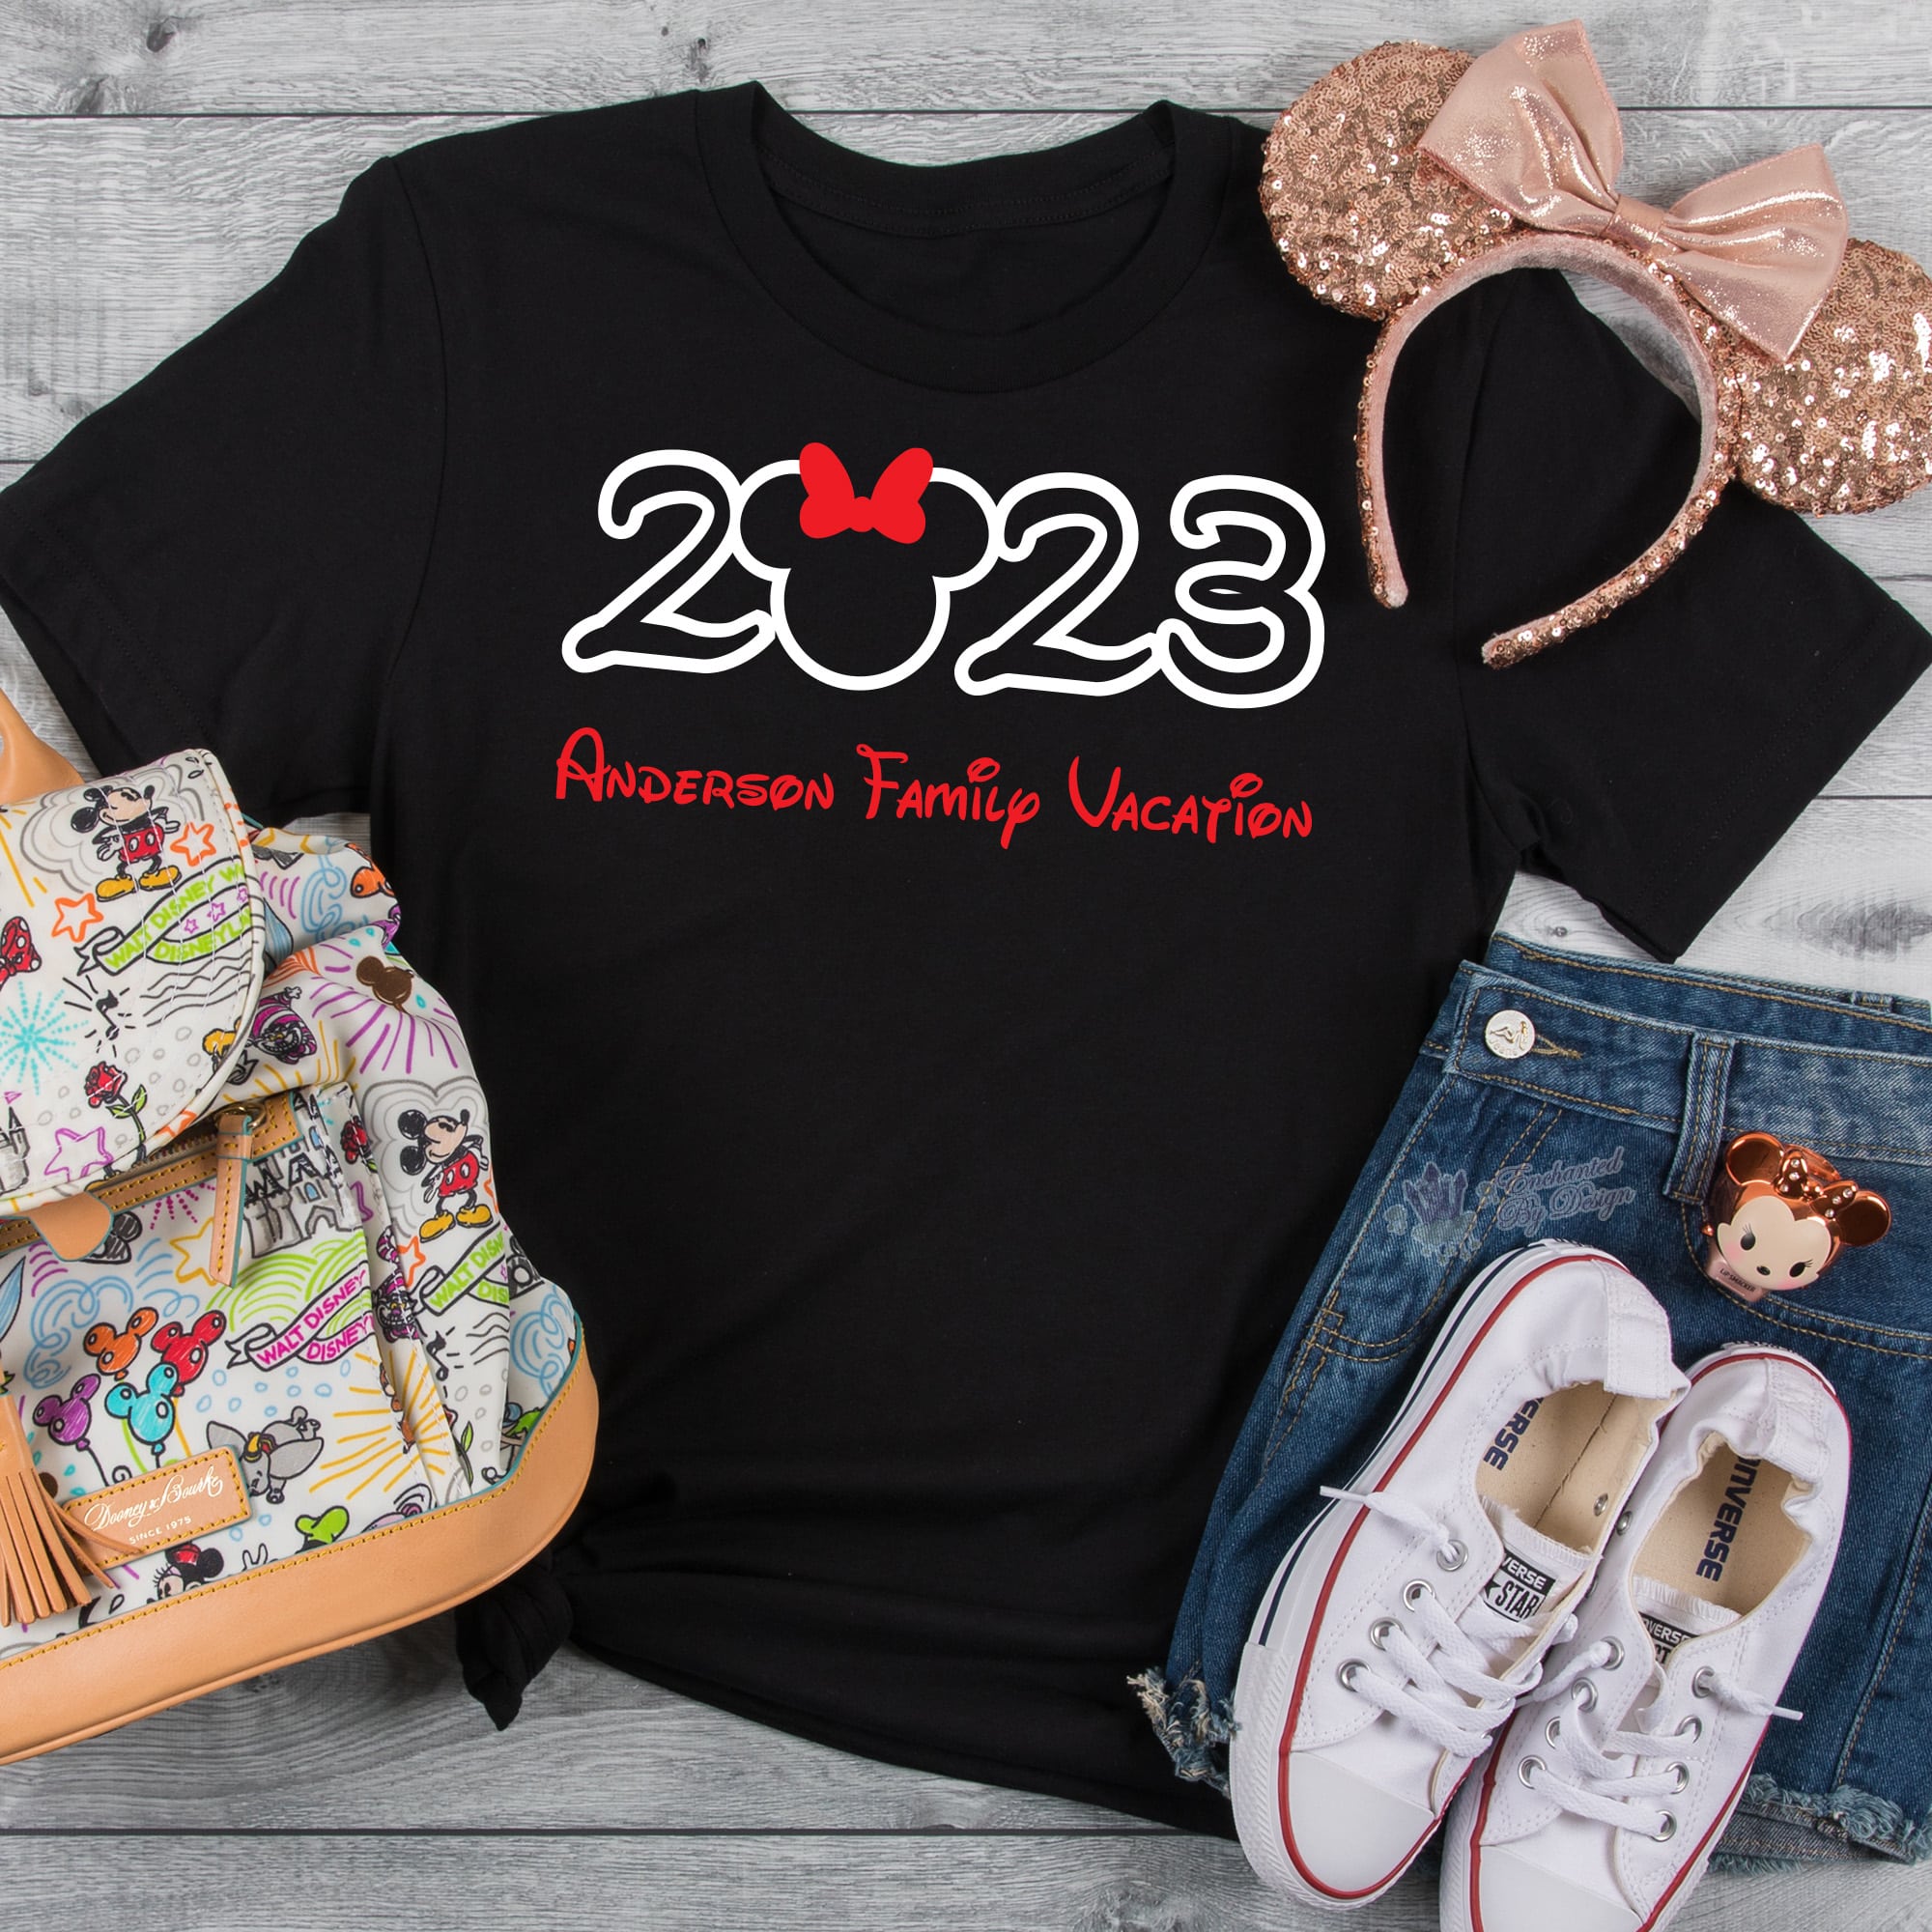 Matching 2023 Custom Disney Family Vacation Personalized Shirts Featuring  YOUR FAMILY or Custom Text Disney Cruise Shirts Matching Group Shirts